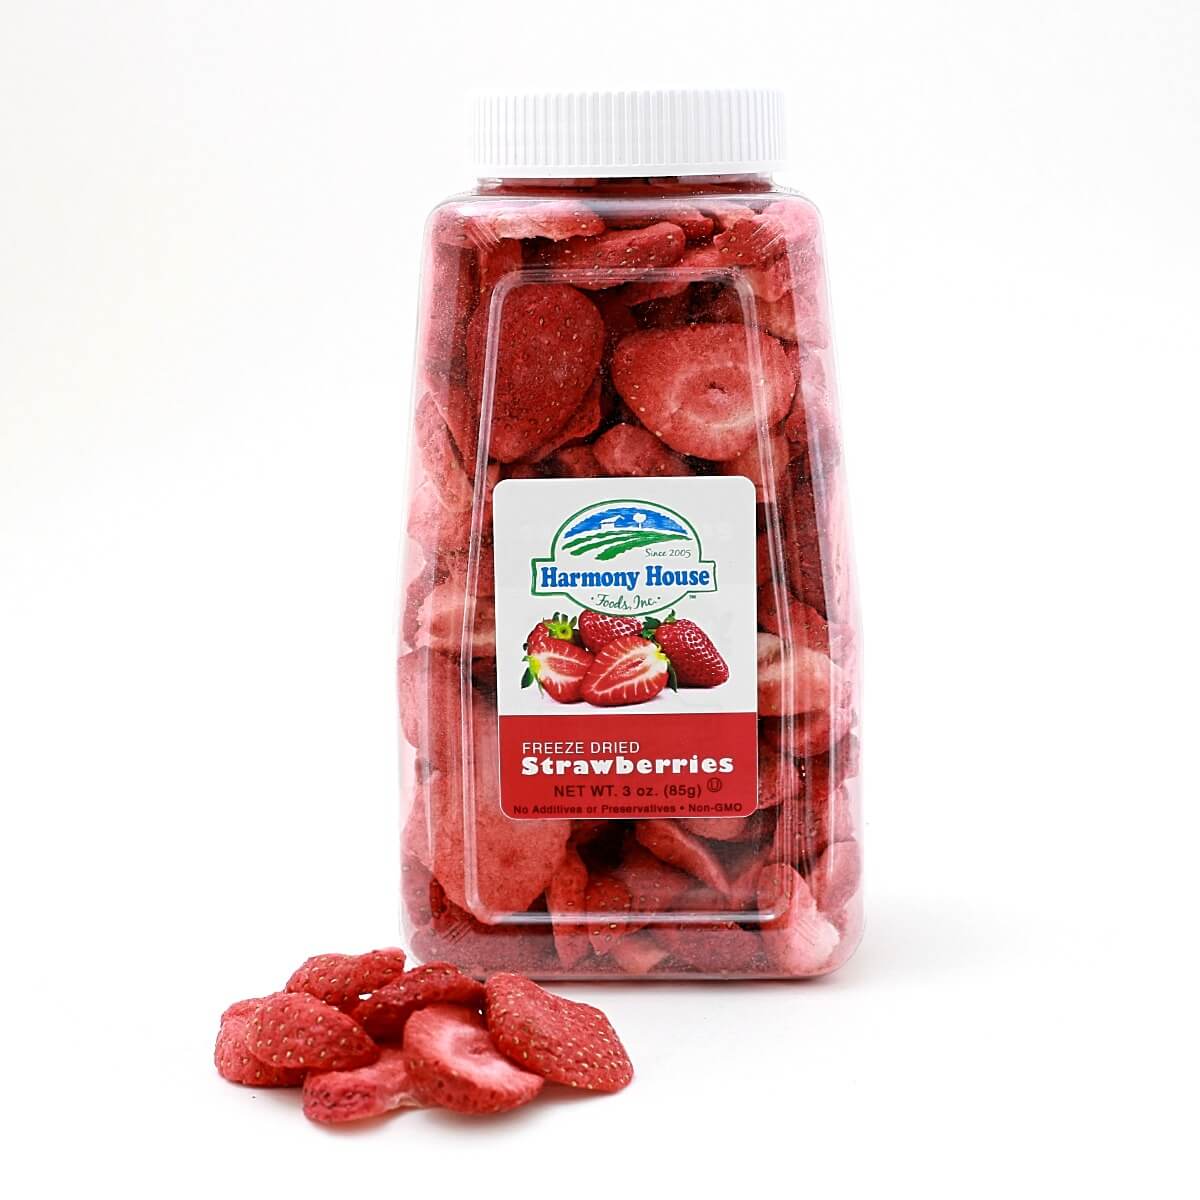 A jar of sliced Harmony House Freeze Dried Strawberries sitting on a white surface.